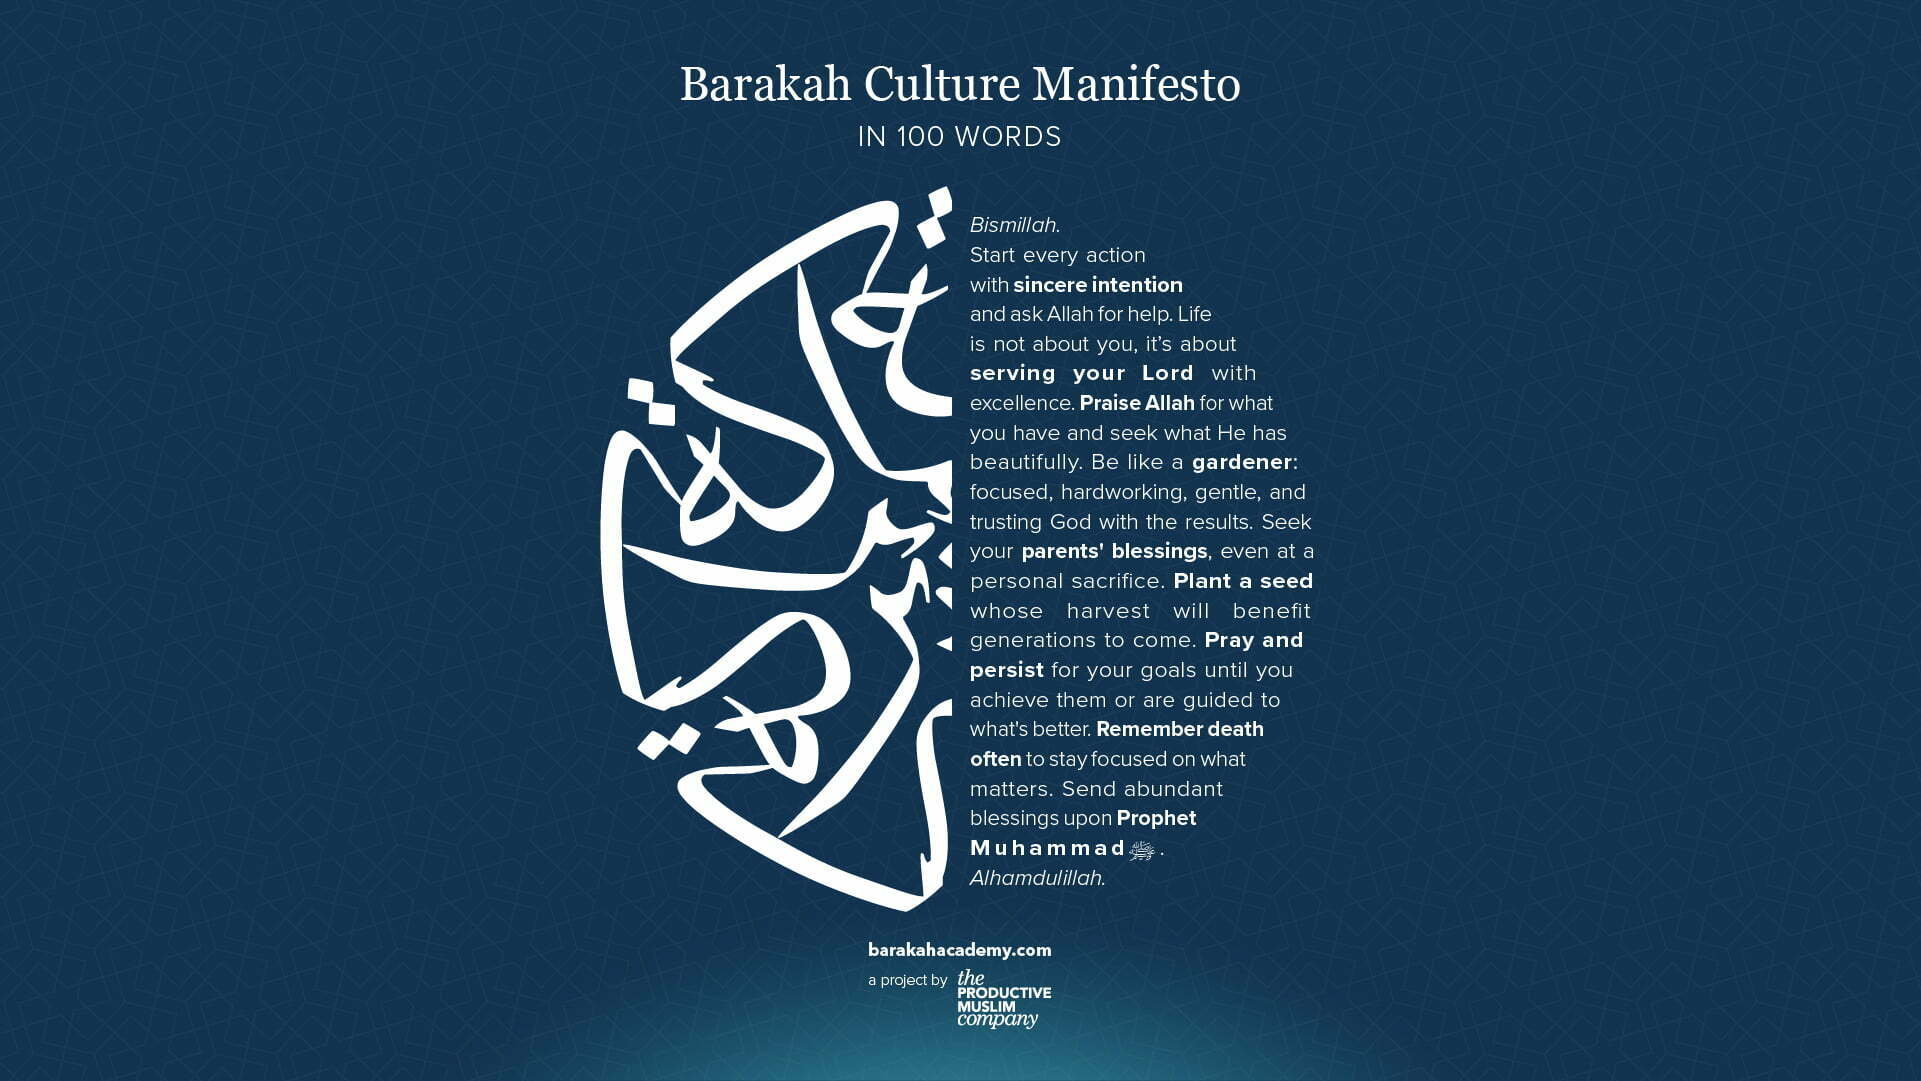 Now Barakah Culture Manifesto Wallpaper For Your